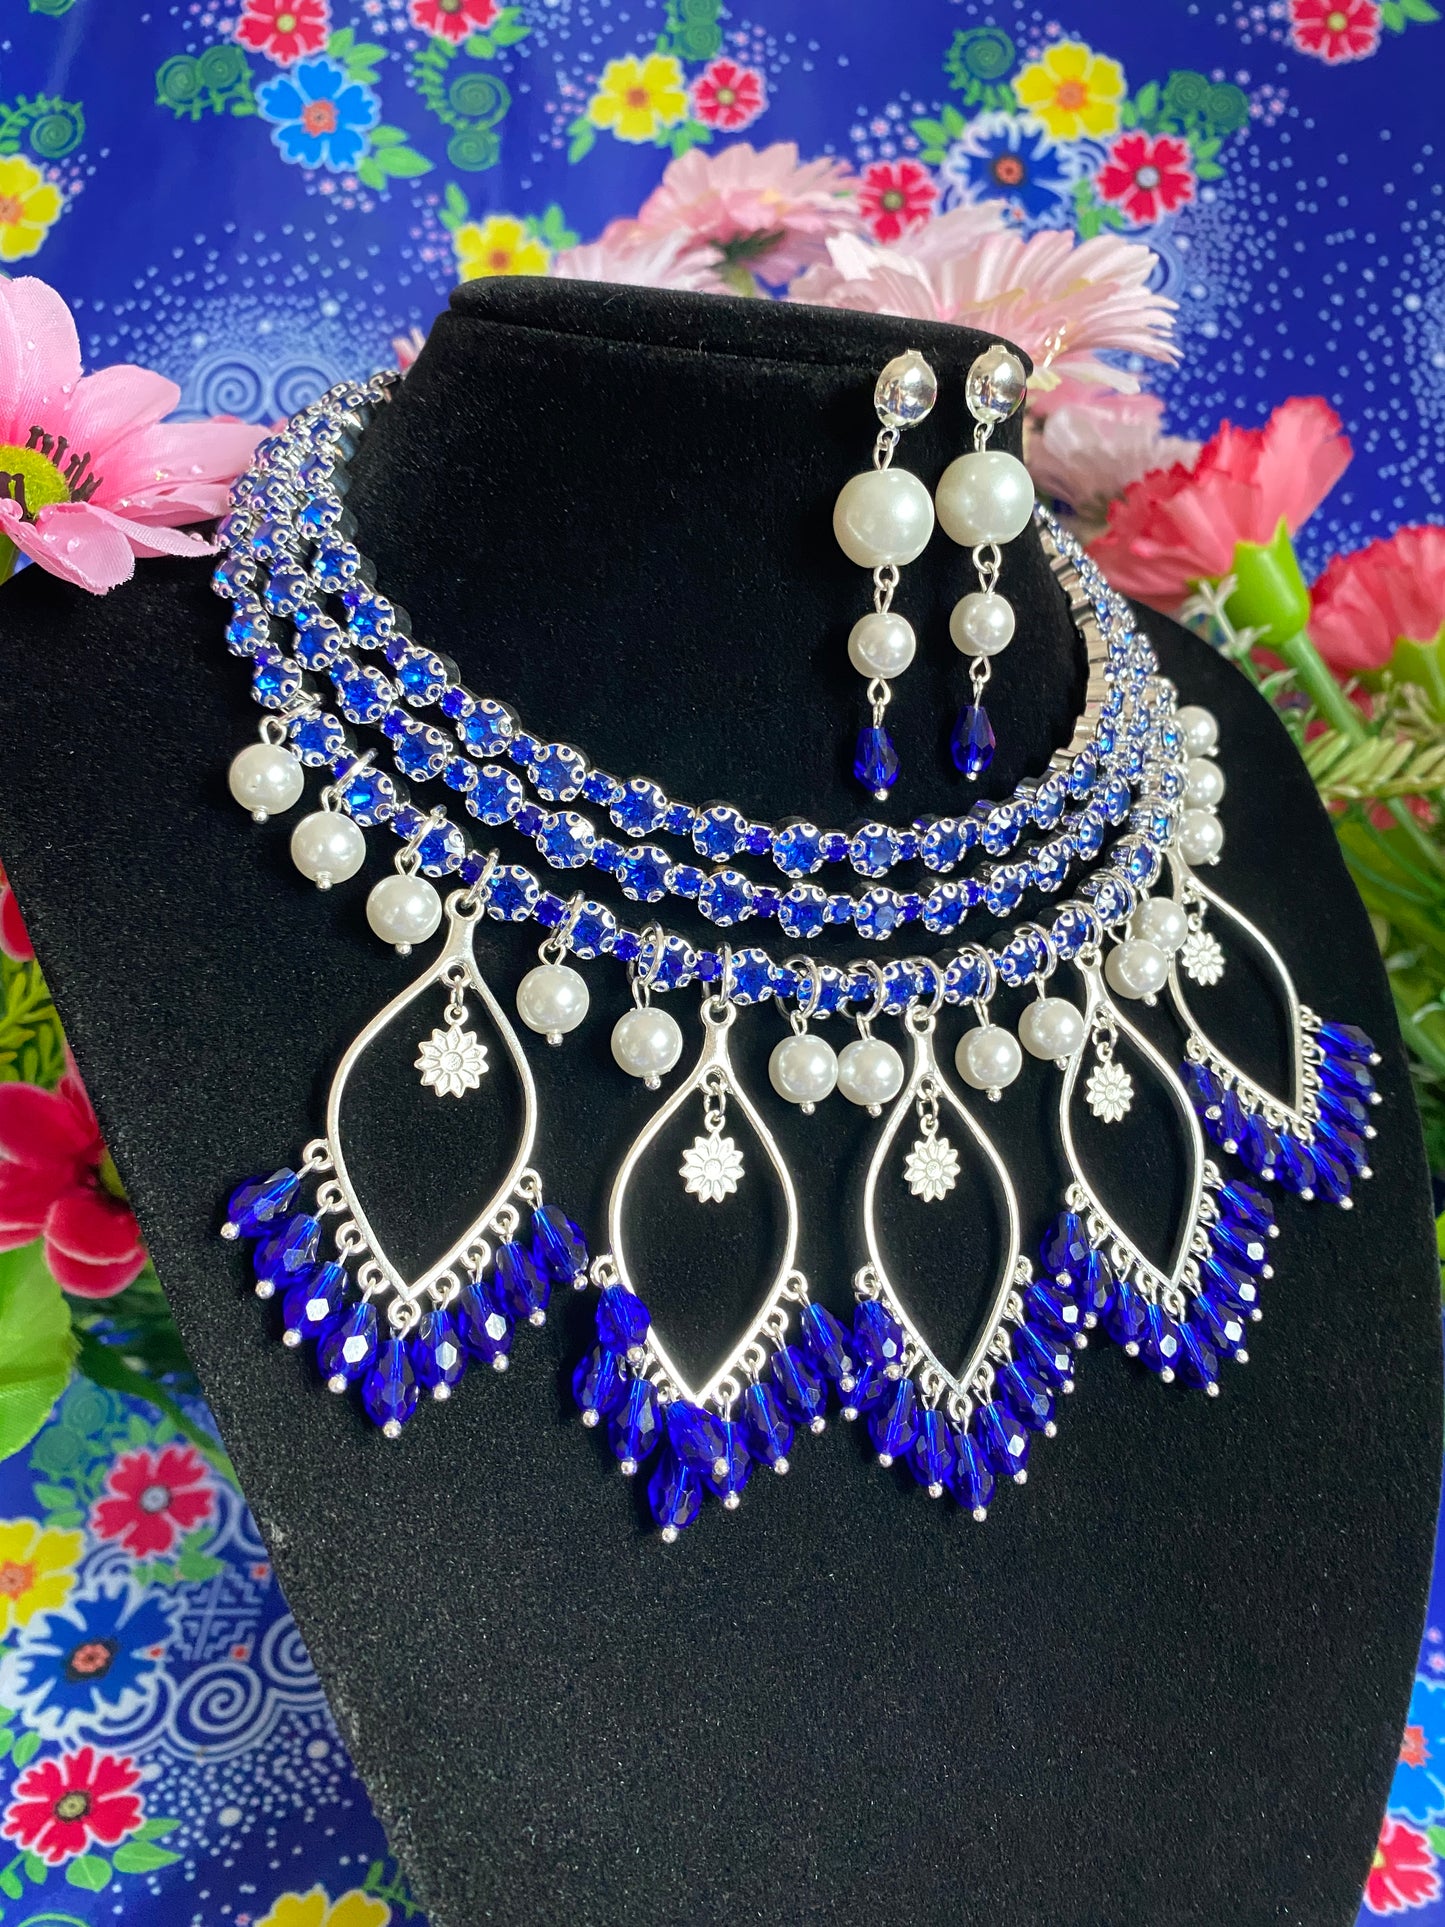 RSN044 Exquisite Rhinestone Necklace w/Earrings